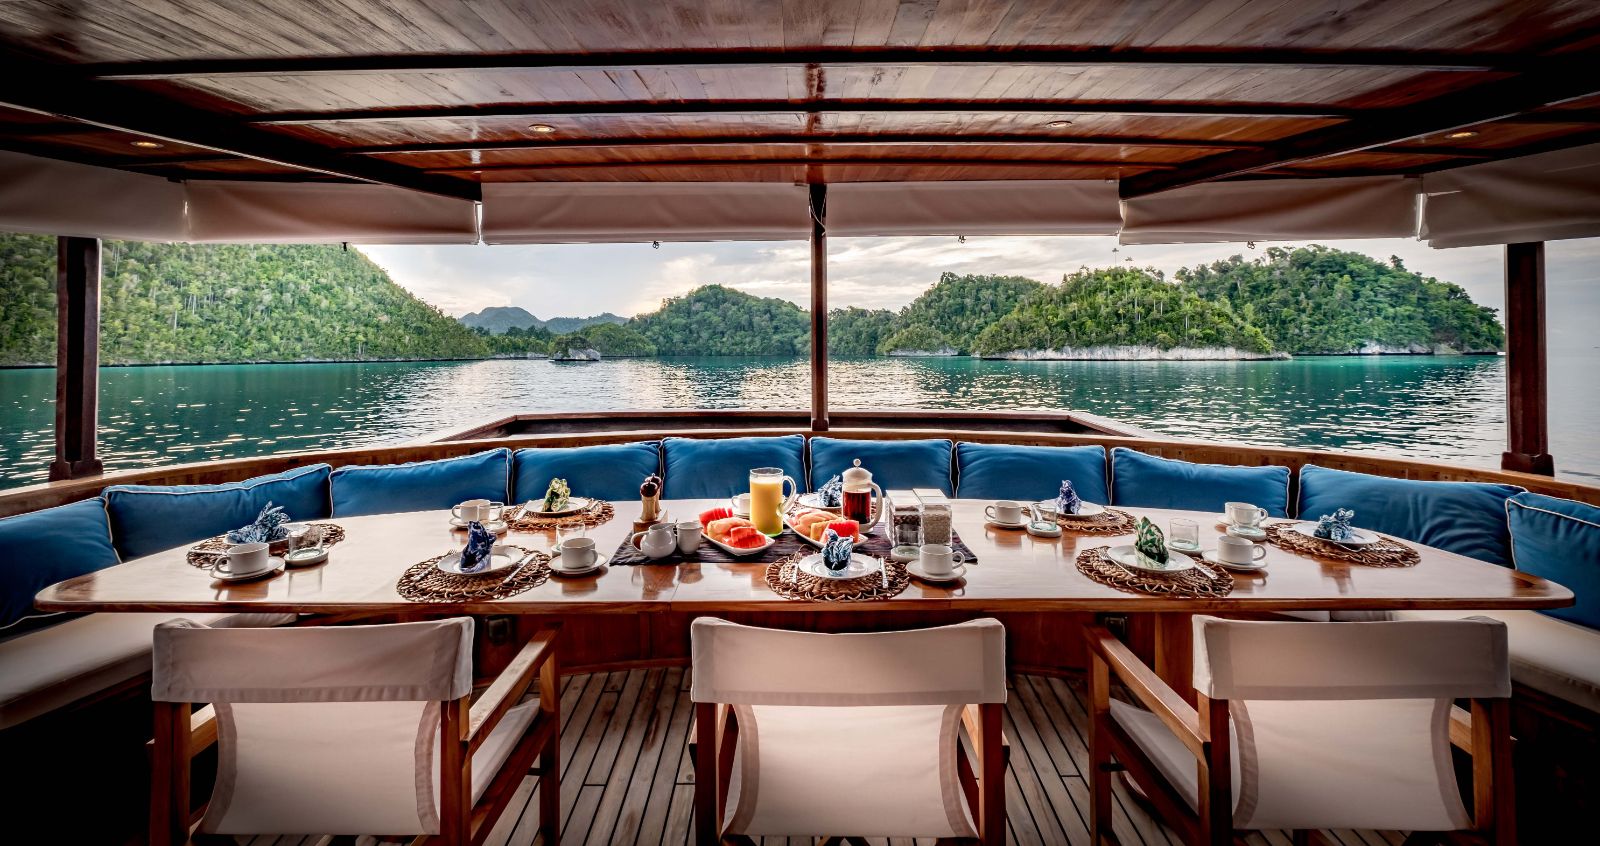 Outdoor dining set up on Luxury Yacht Rascal